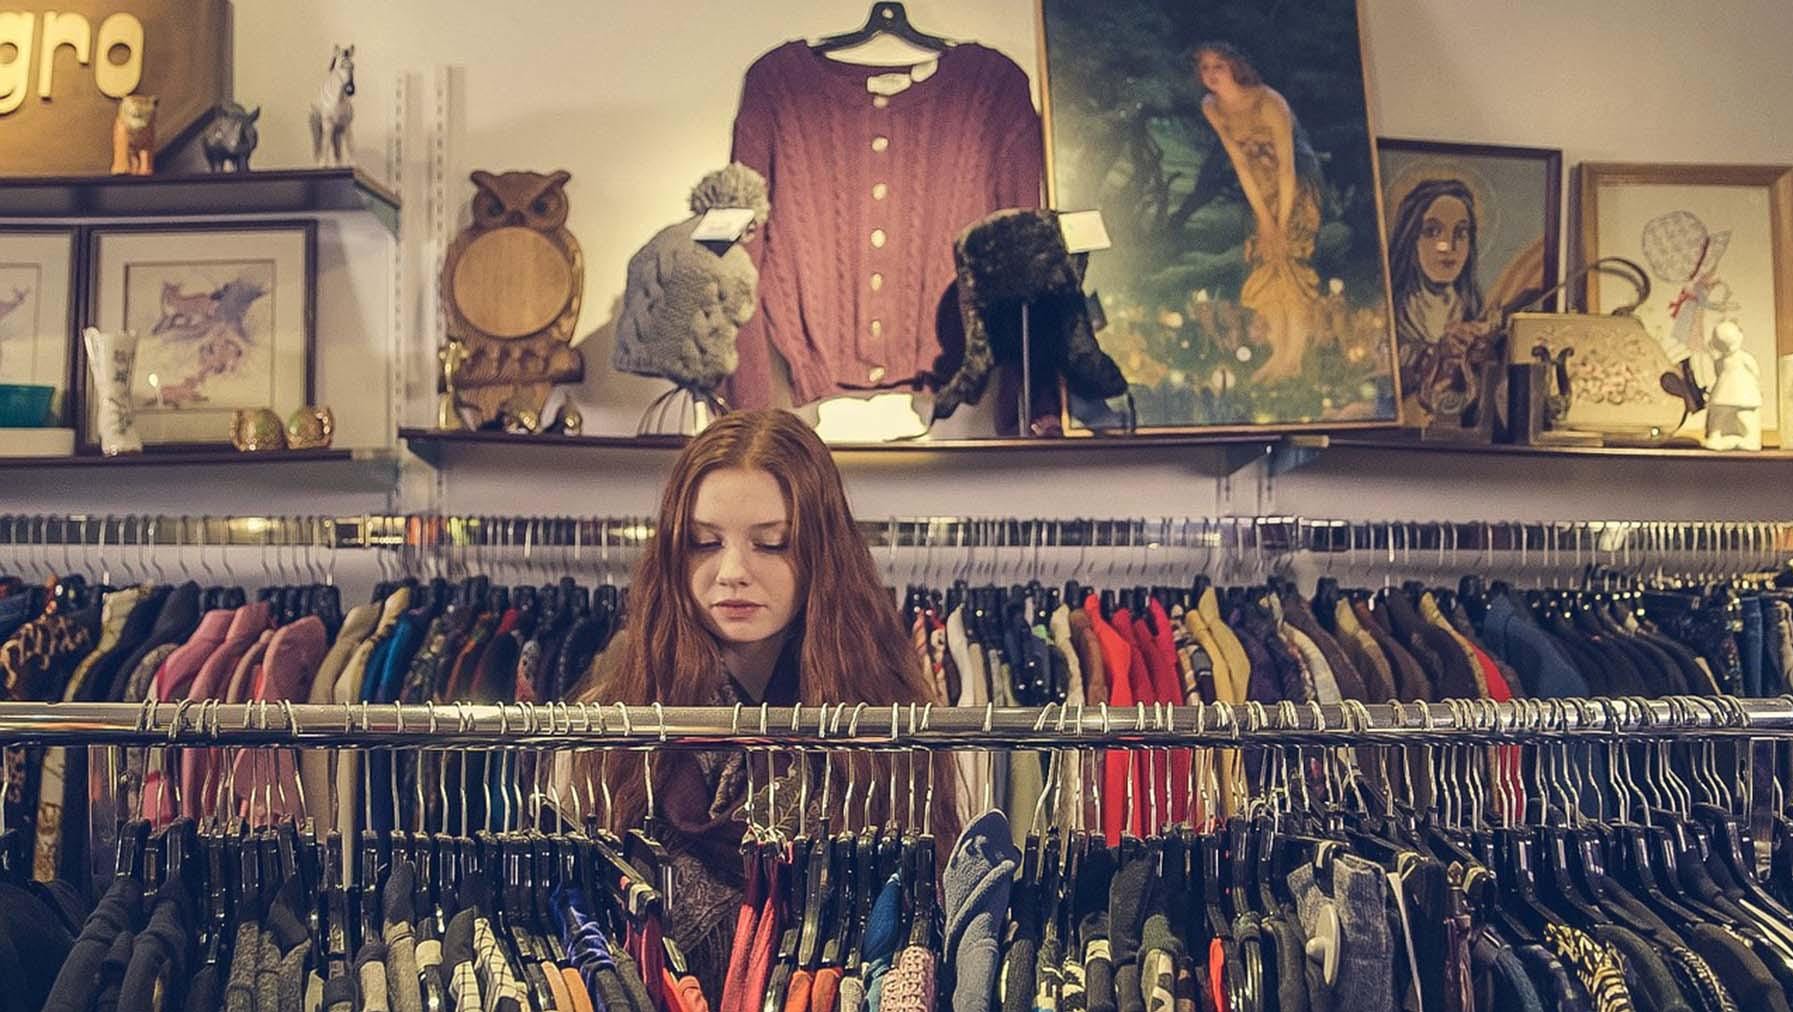 8 items that are easy to find at secondhand stores